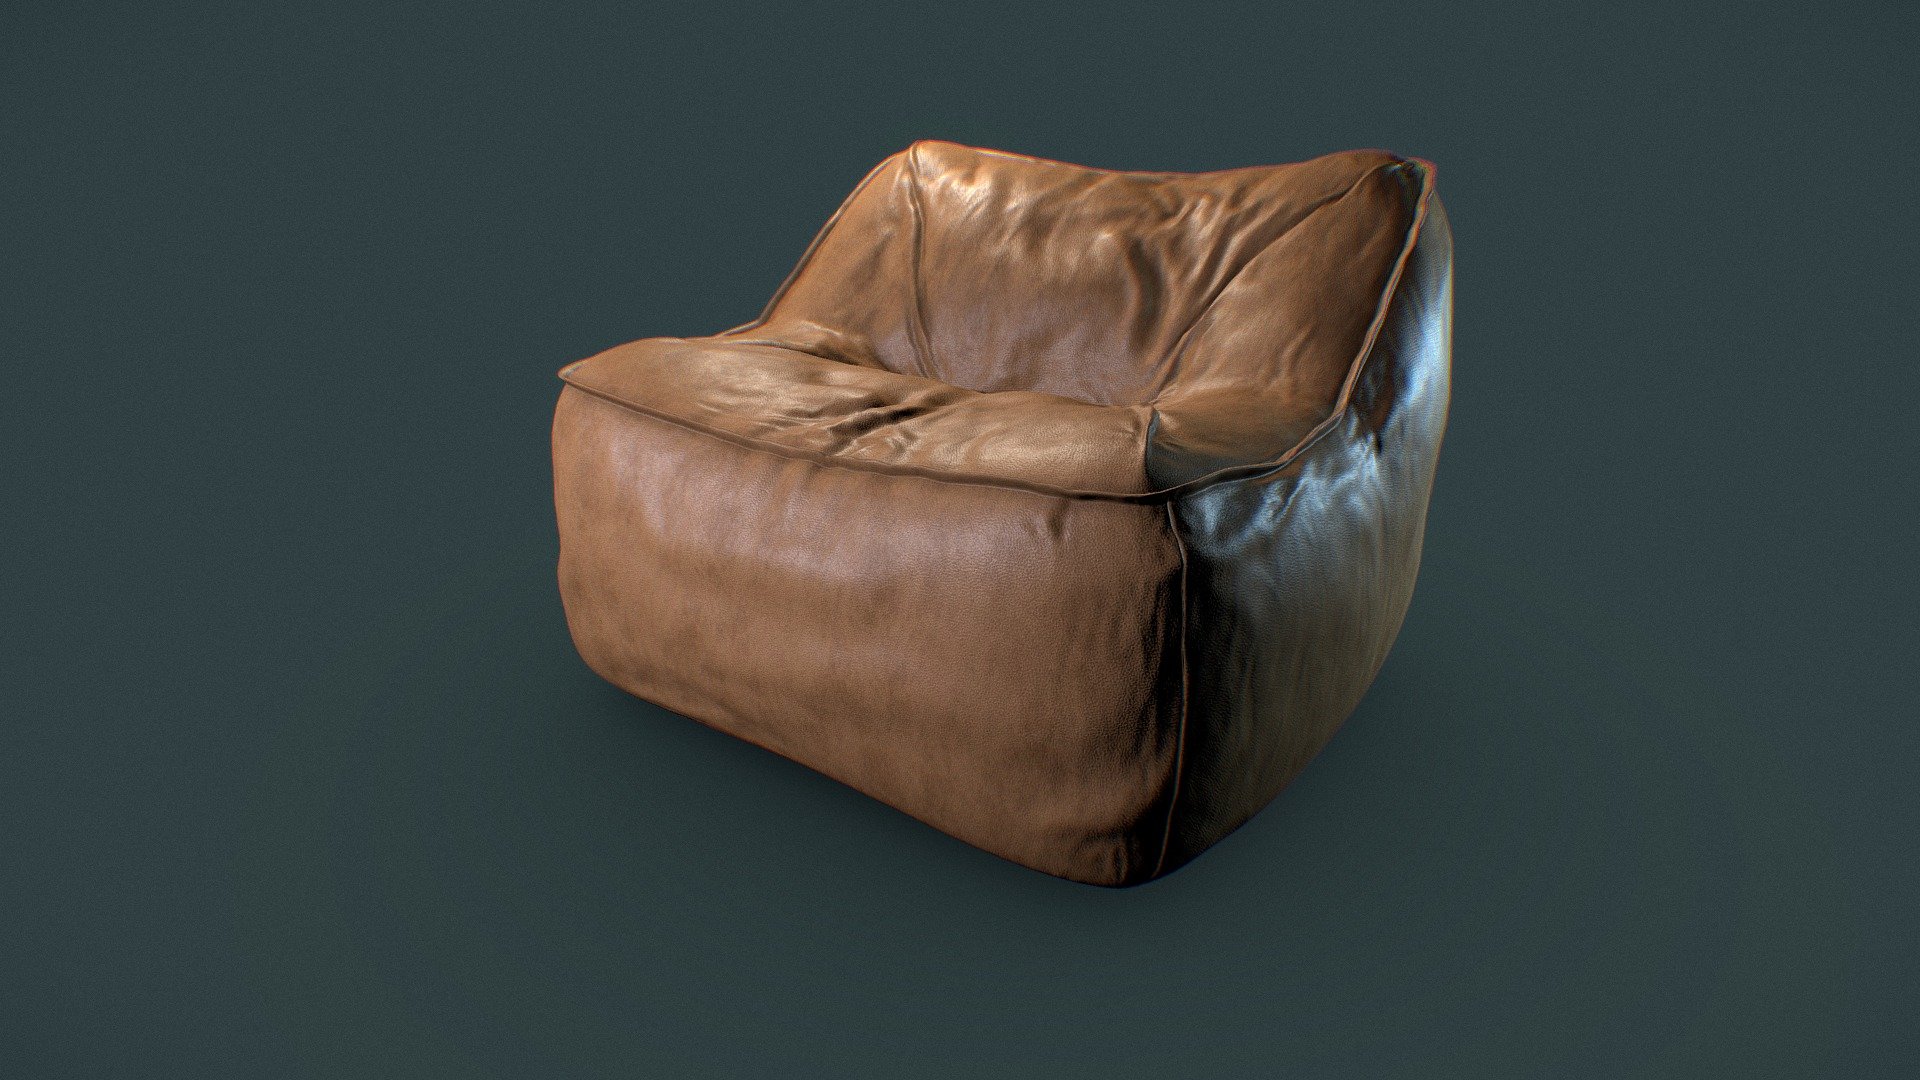 It is a 3d model of Modern Lounger for using in architecture-interiors. It is can be used as a resting furniture in games and other render engines.

This model is created in Maya and textured in Substance Painter.

This model is made in real proportions.

High quality of textures are available to download.

Metal-ness workflow- Base Color, Normal, Metal-ness, Ambient Occlusion and Roughness Textures - PNG 3d model